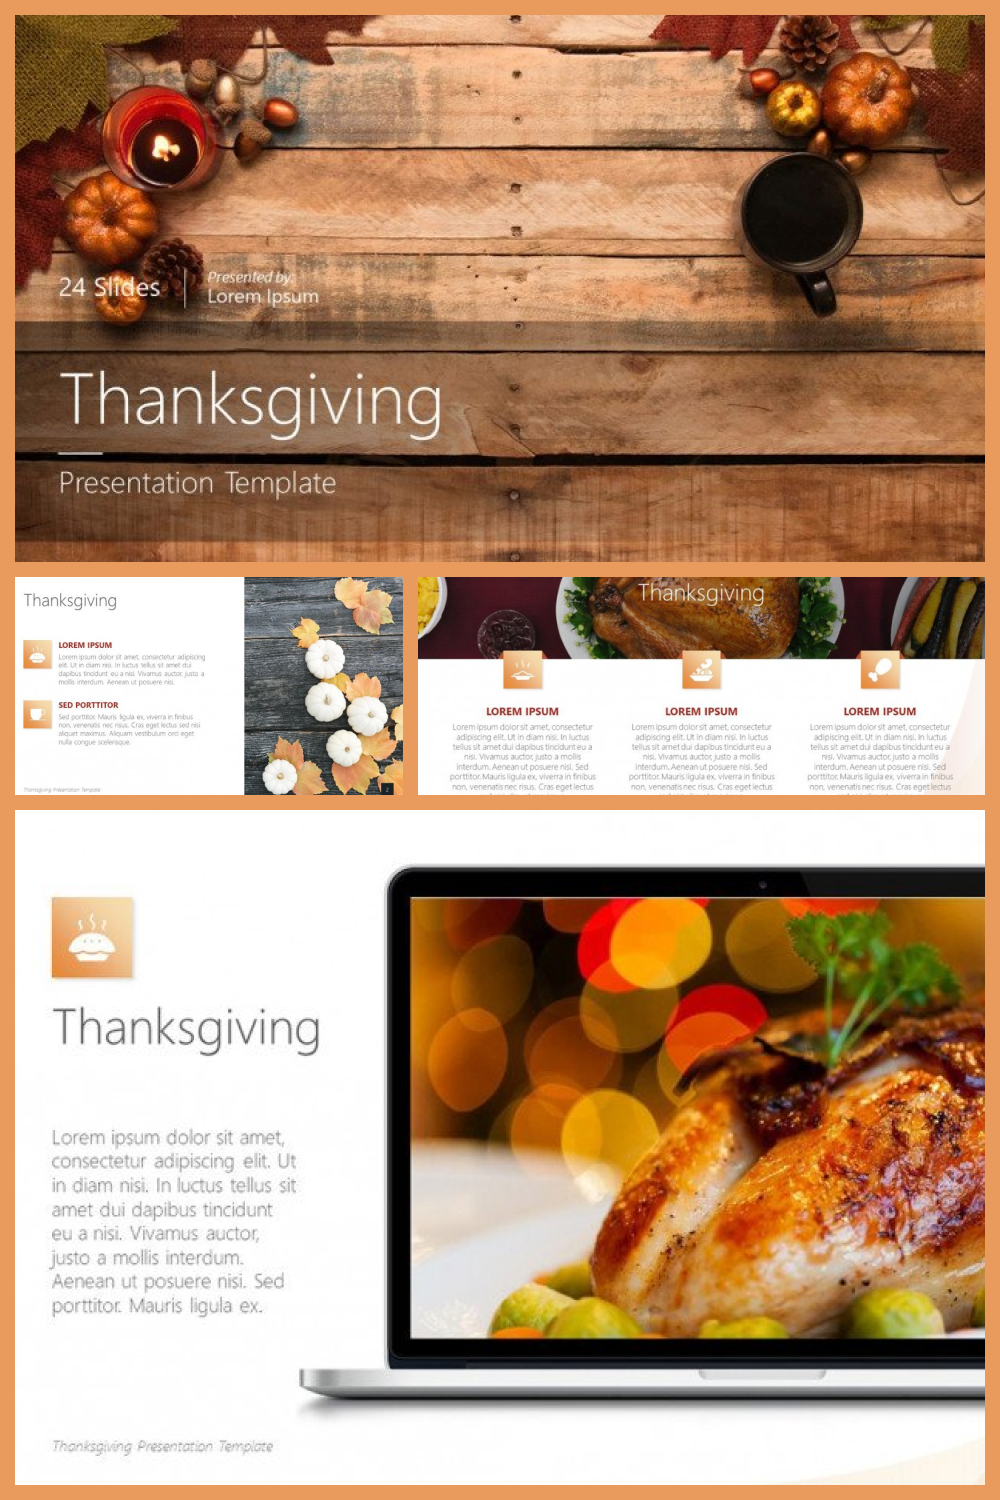 Collage of screenshots of the presentation pages with photos of a board table with pumpkins and turkey.